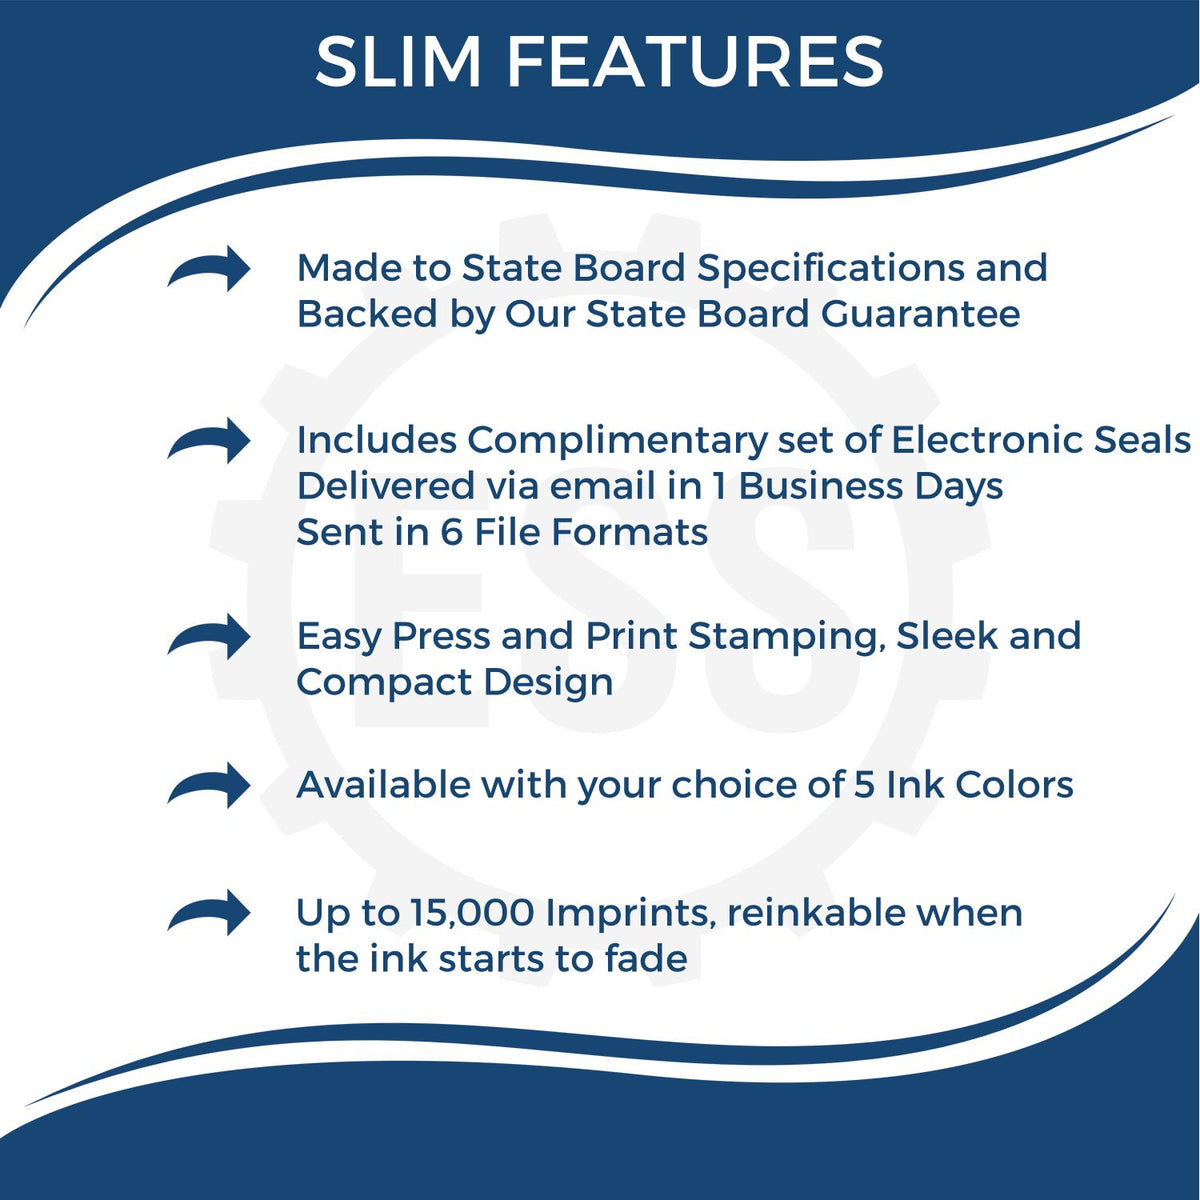 A picture of an infographic highlighting the selling points for the Super Slim Massachusetts Notary Public Stamp